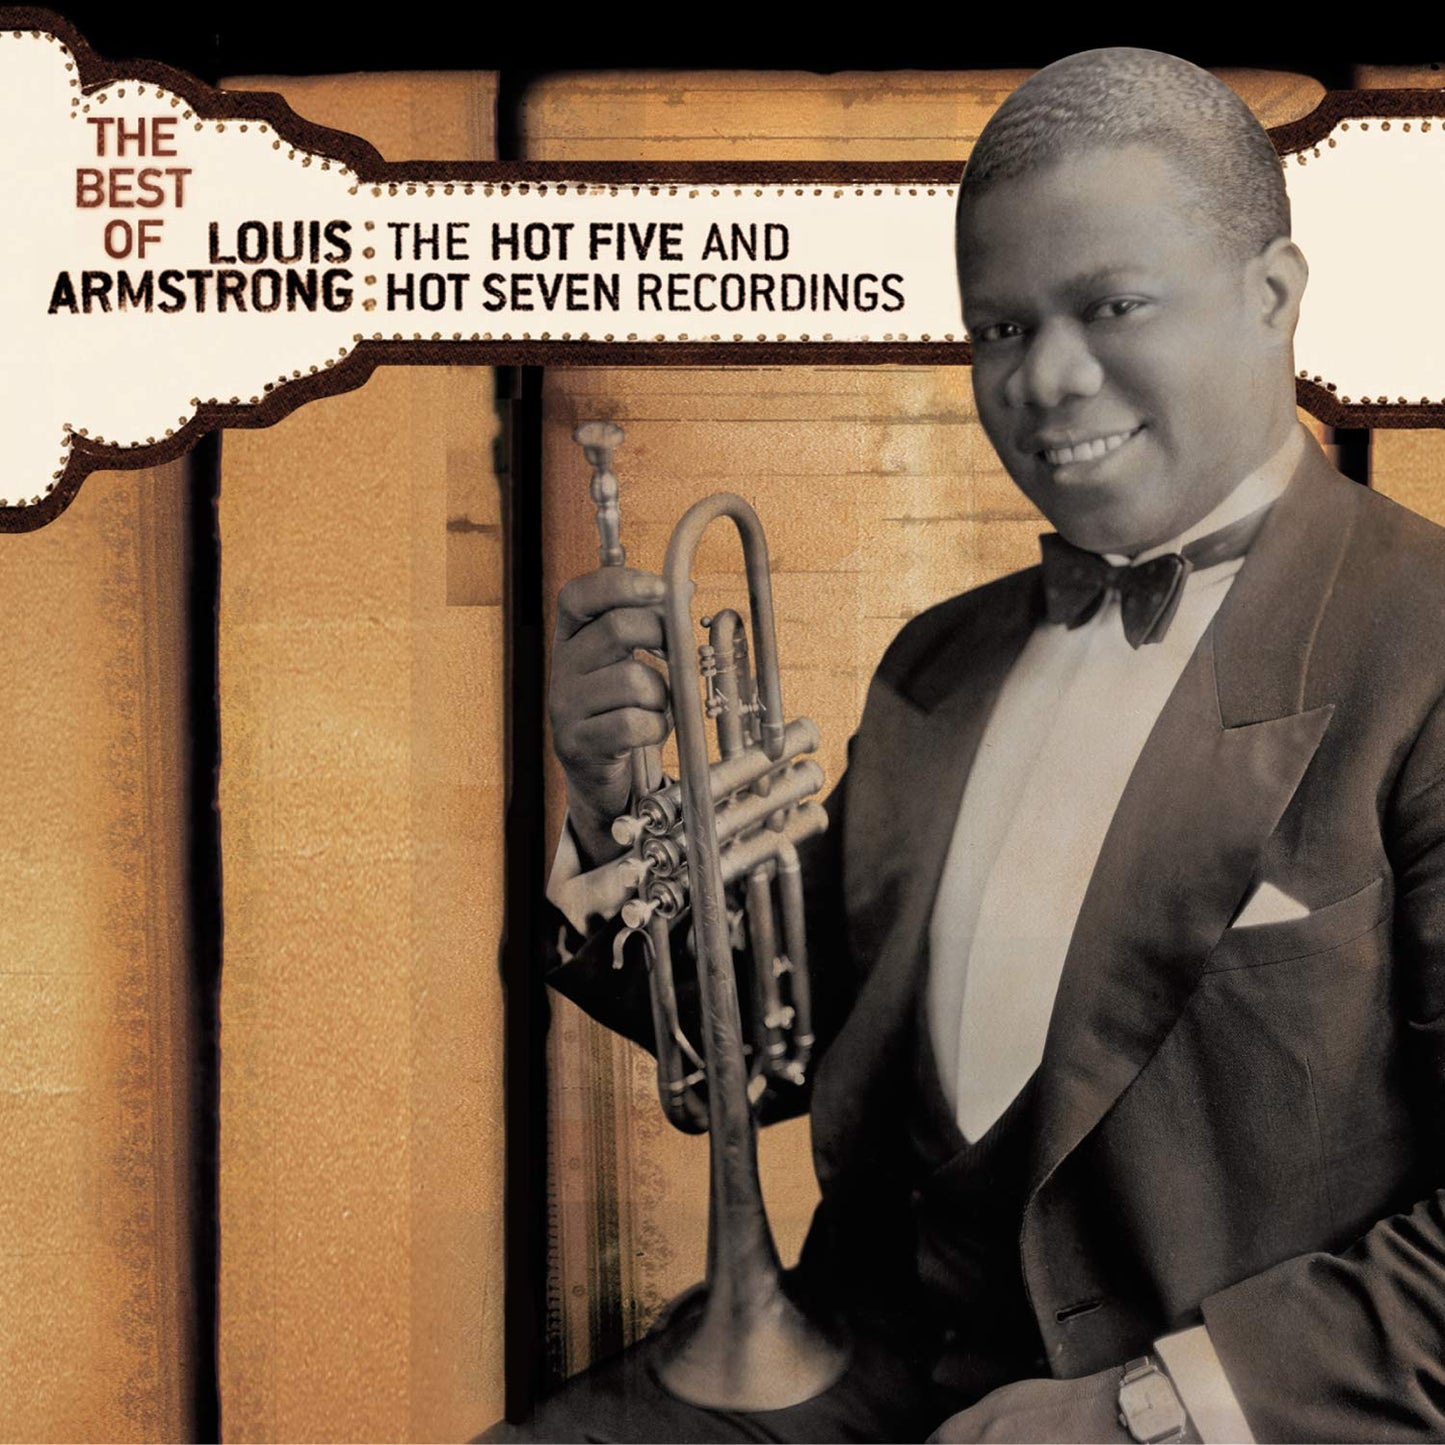 LOUIS ARMSTRONG: BEST OF THE HOT 5 & HOT 7 RECORDINGS